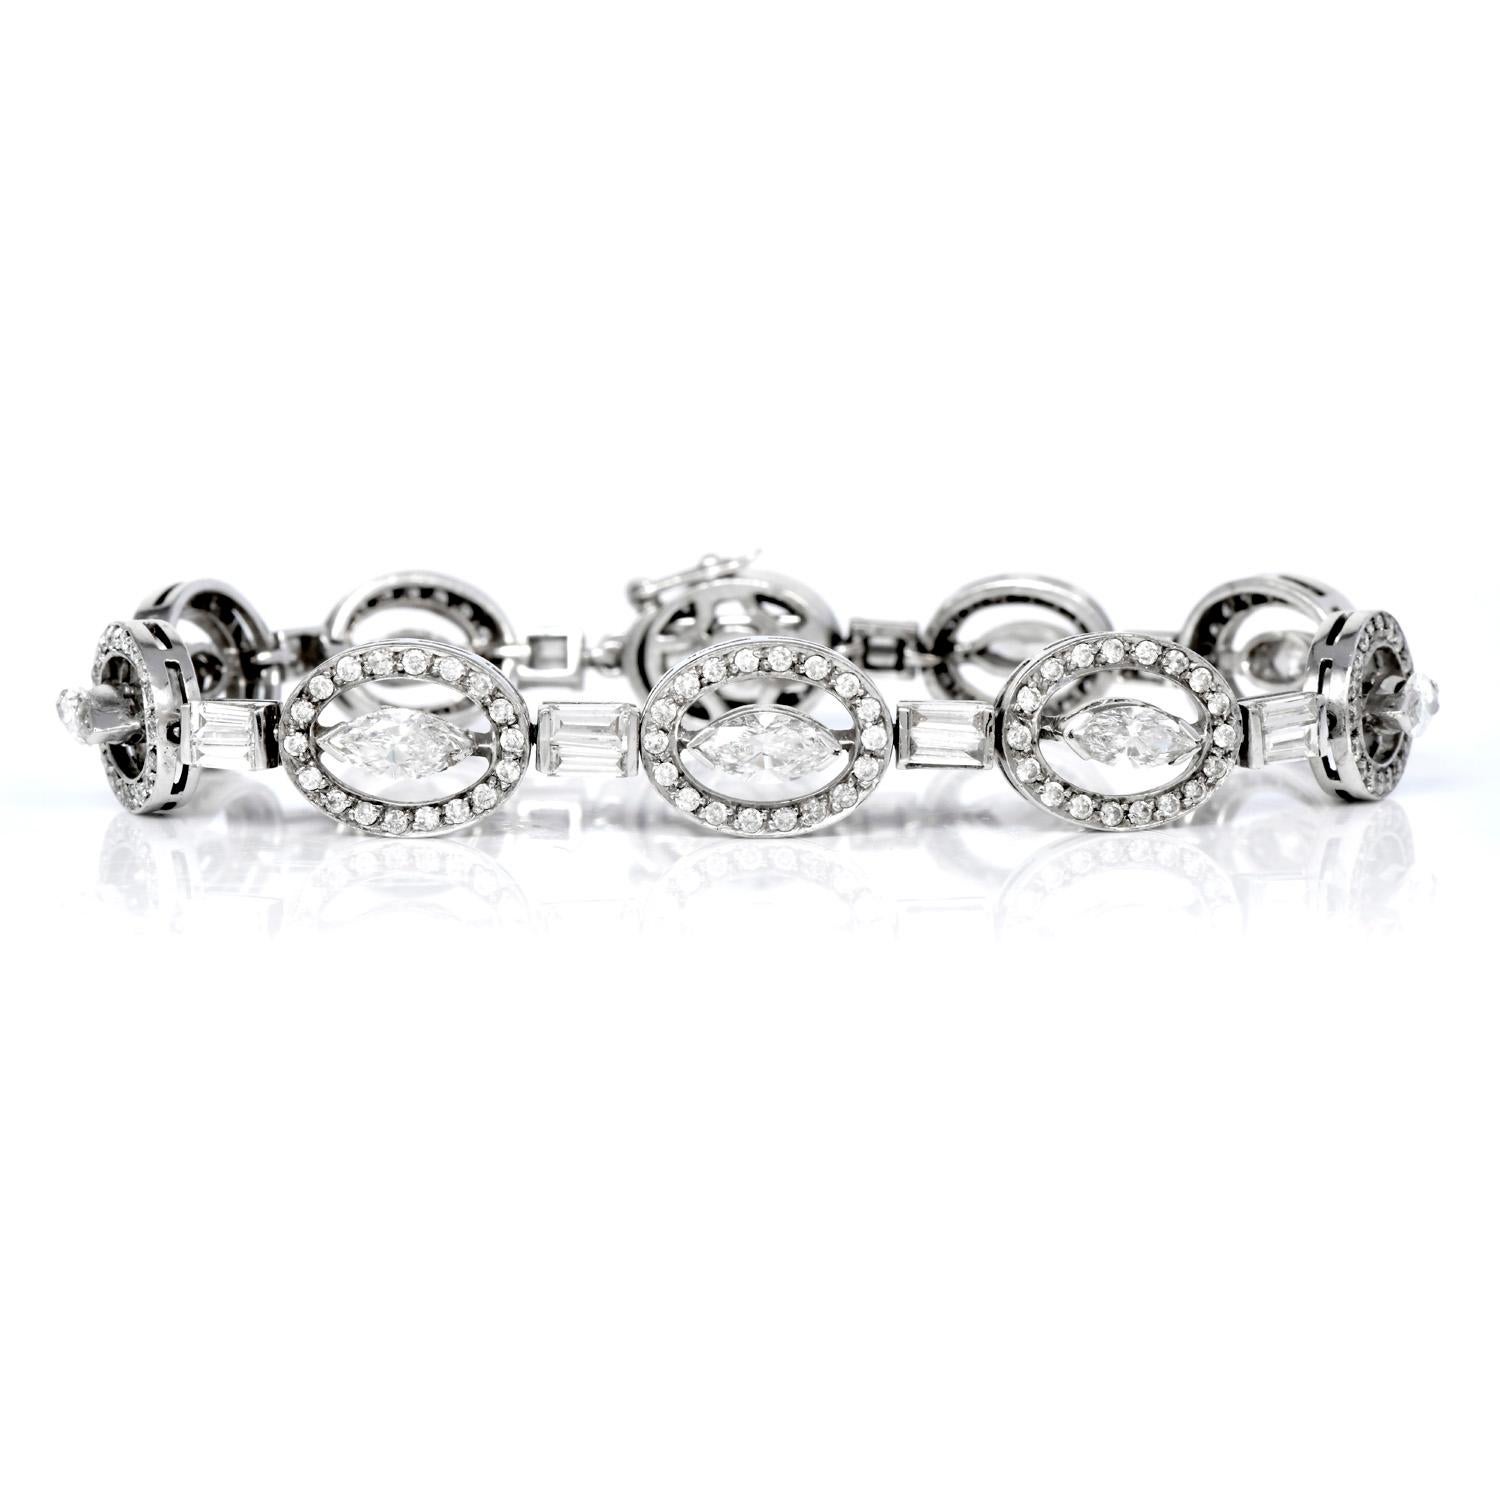 Feel the elegance every day with this stunning Diamond Oval Link Bracelet!
This 1990's bracelet is centered in each link by 10 Marquise-cut Genuine diamond, 180 round diamonds, both round and baguette-cut, totaling approx. 6.70 carats, with